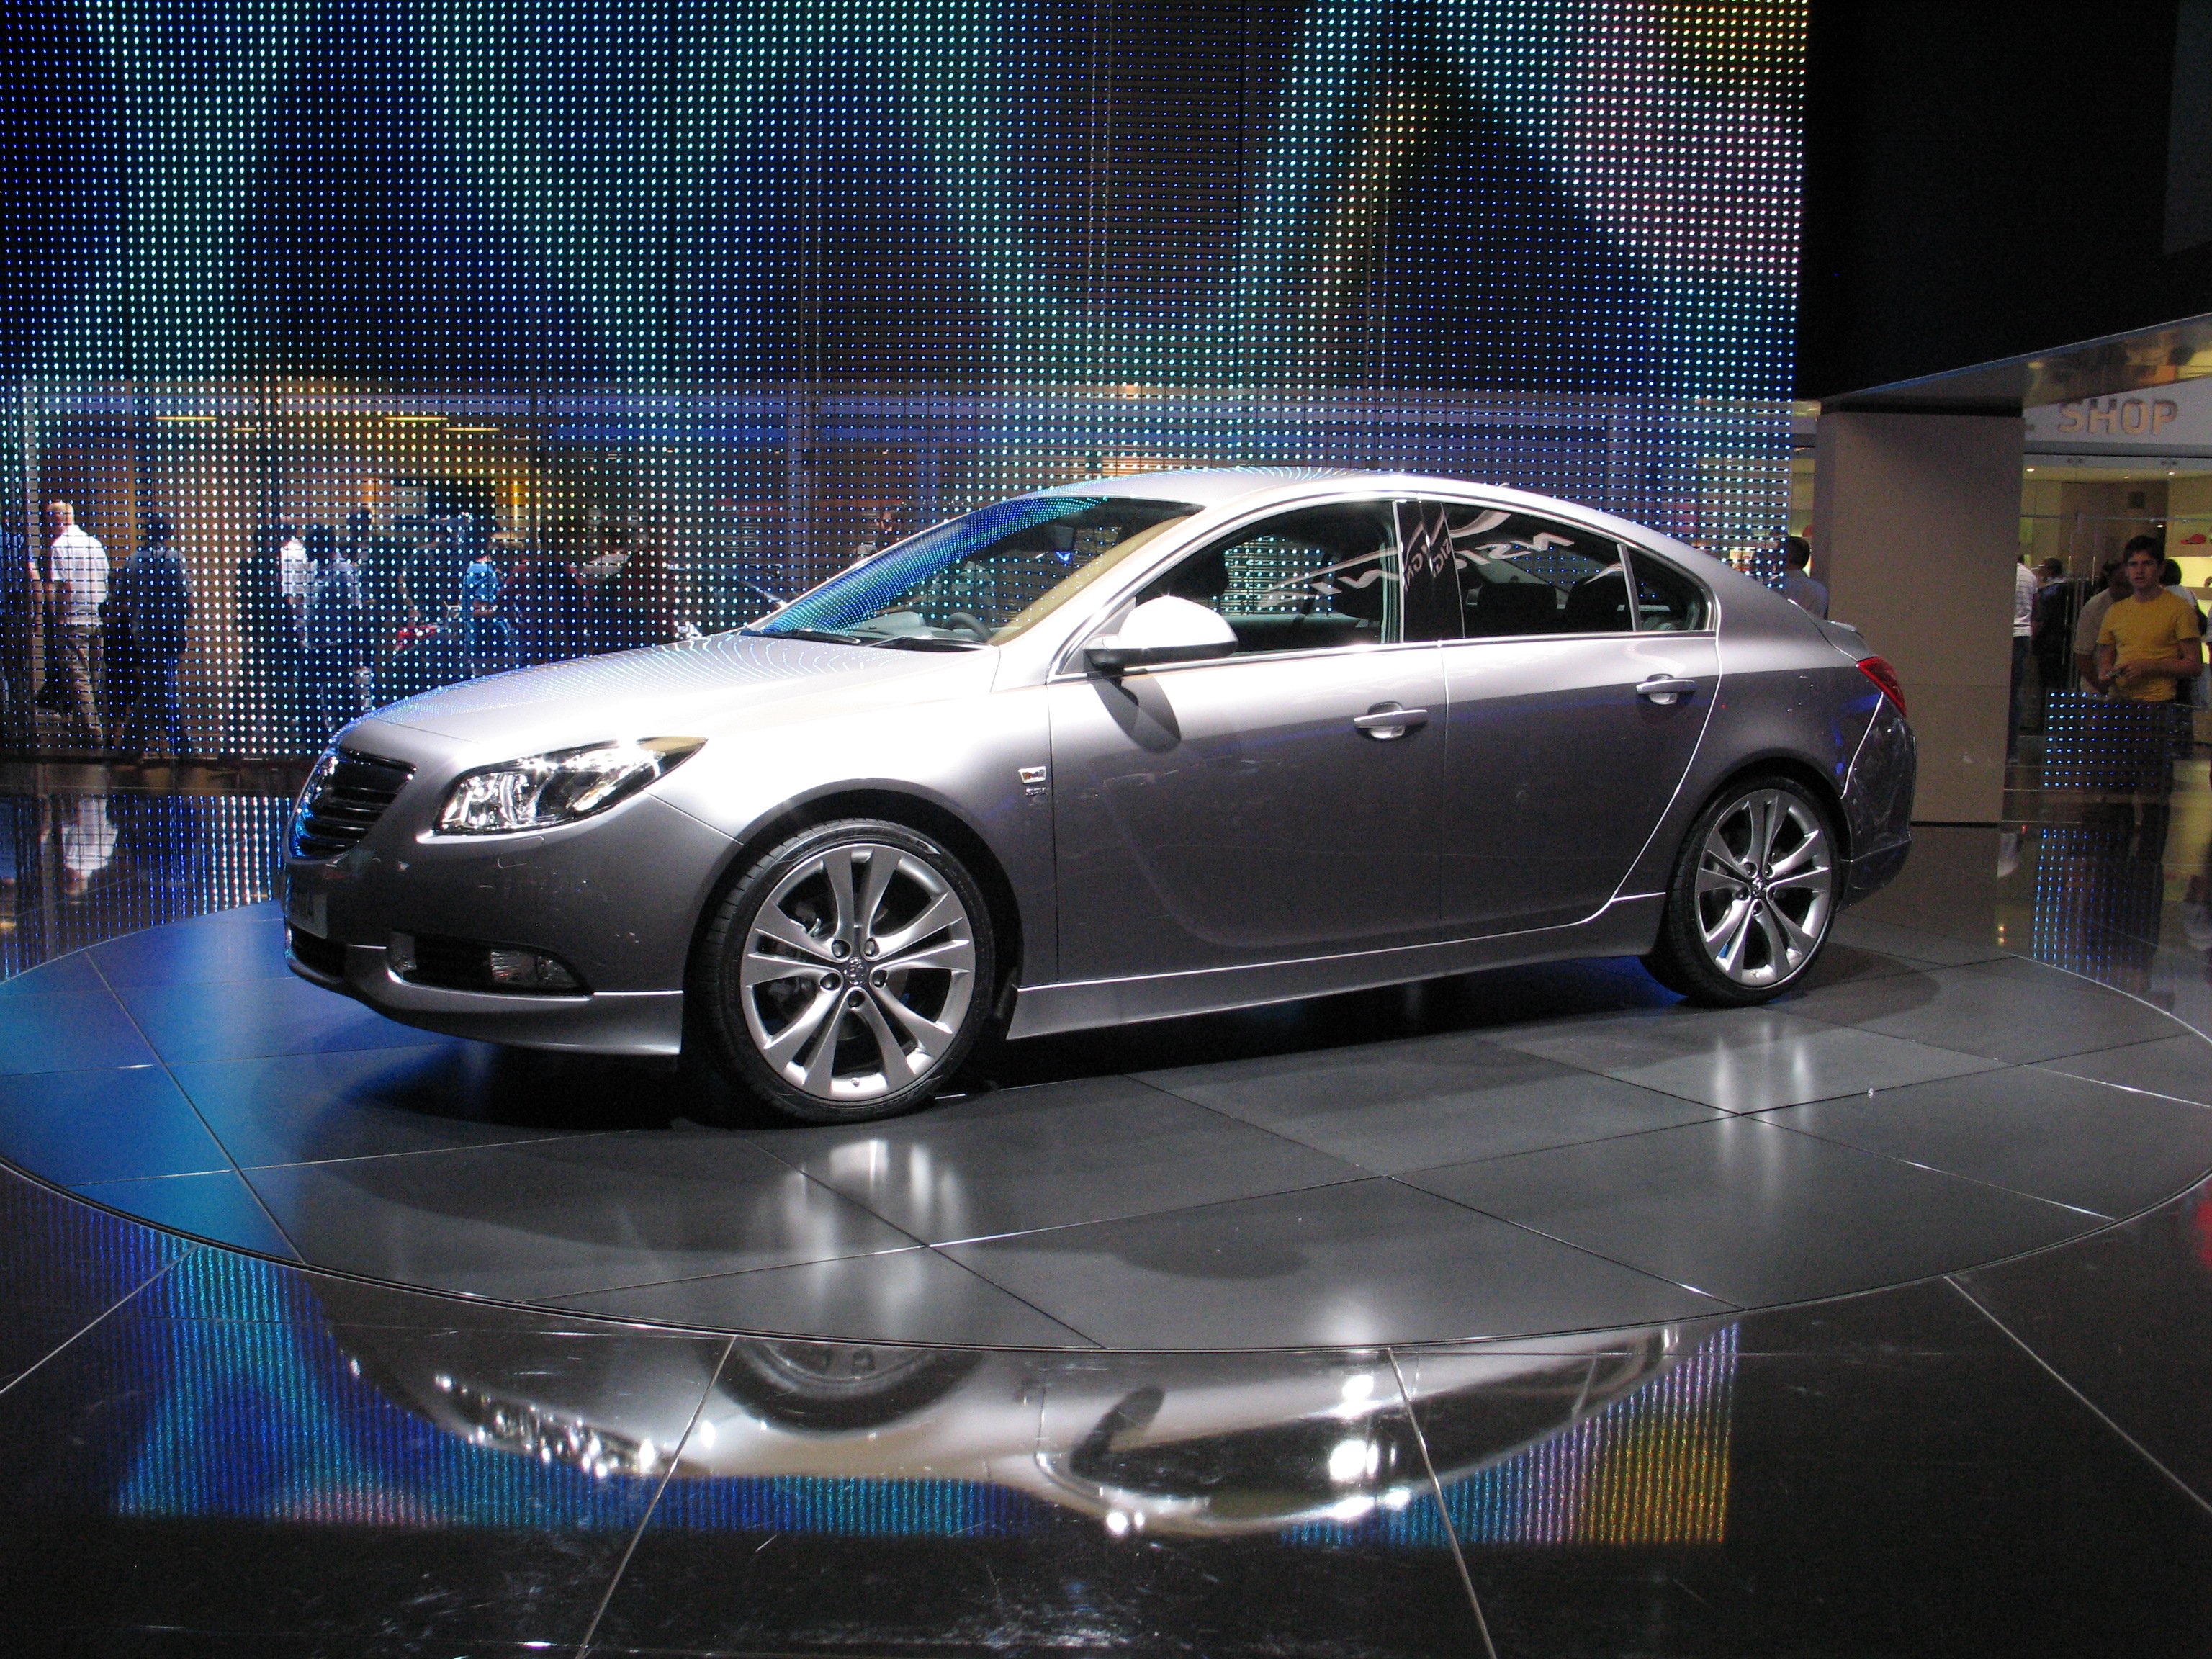 File:Opel Insignia front 20100516.jpg - Wikimedia Commons